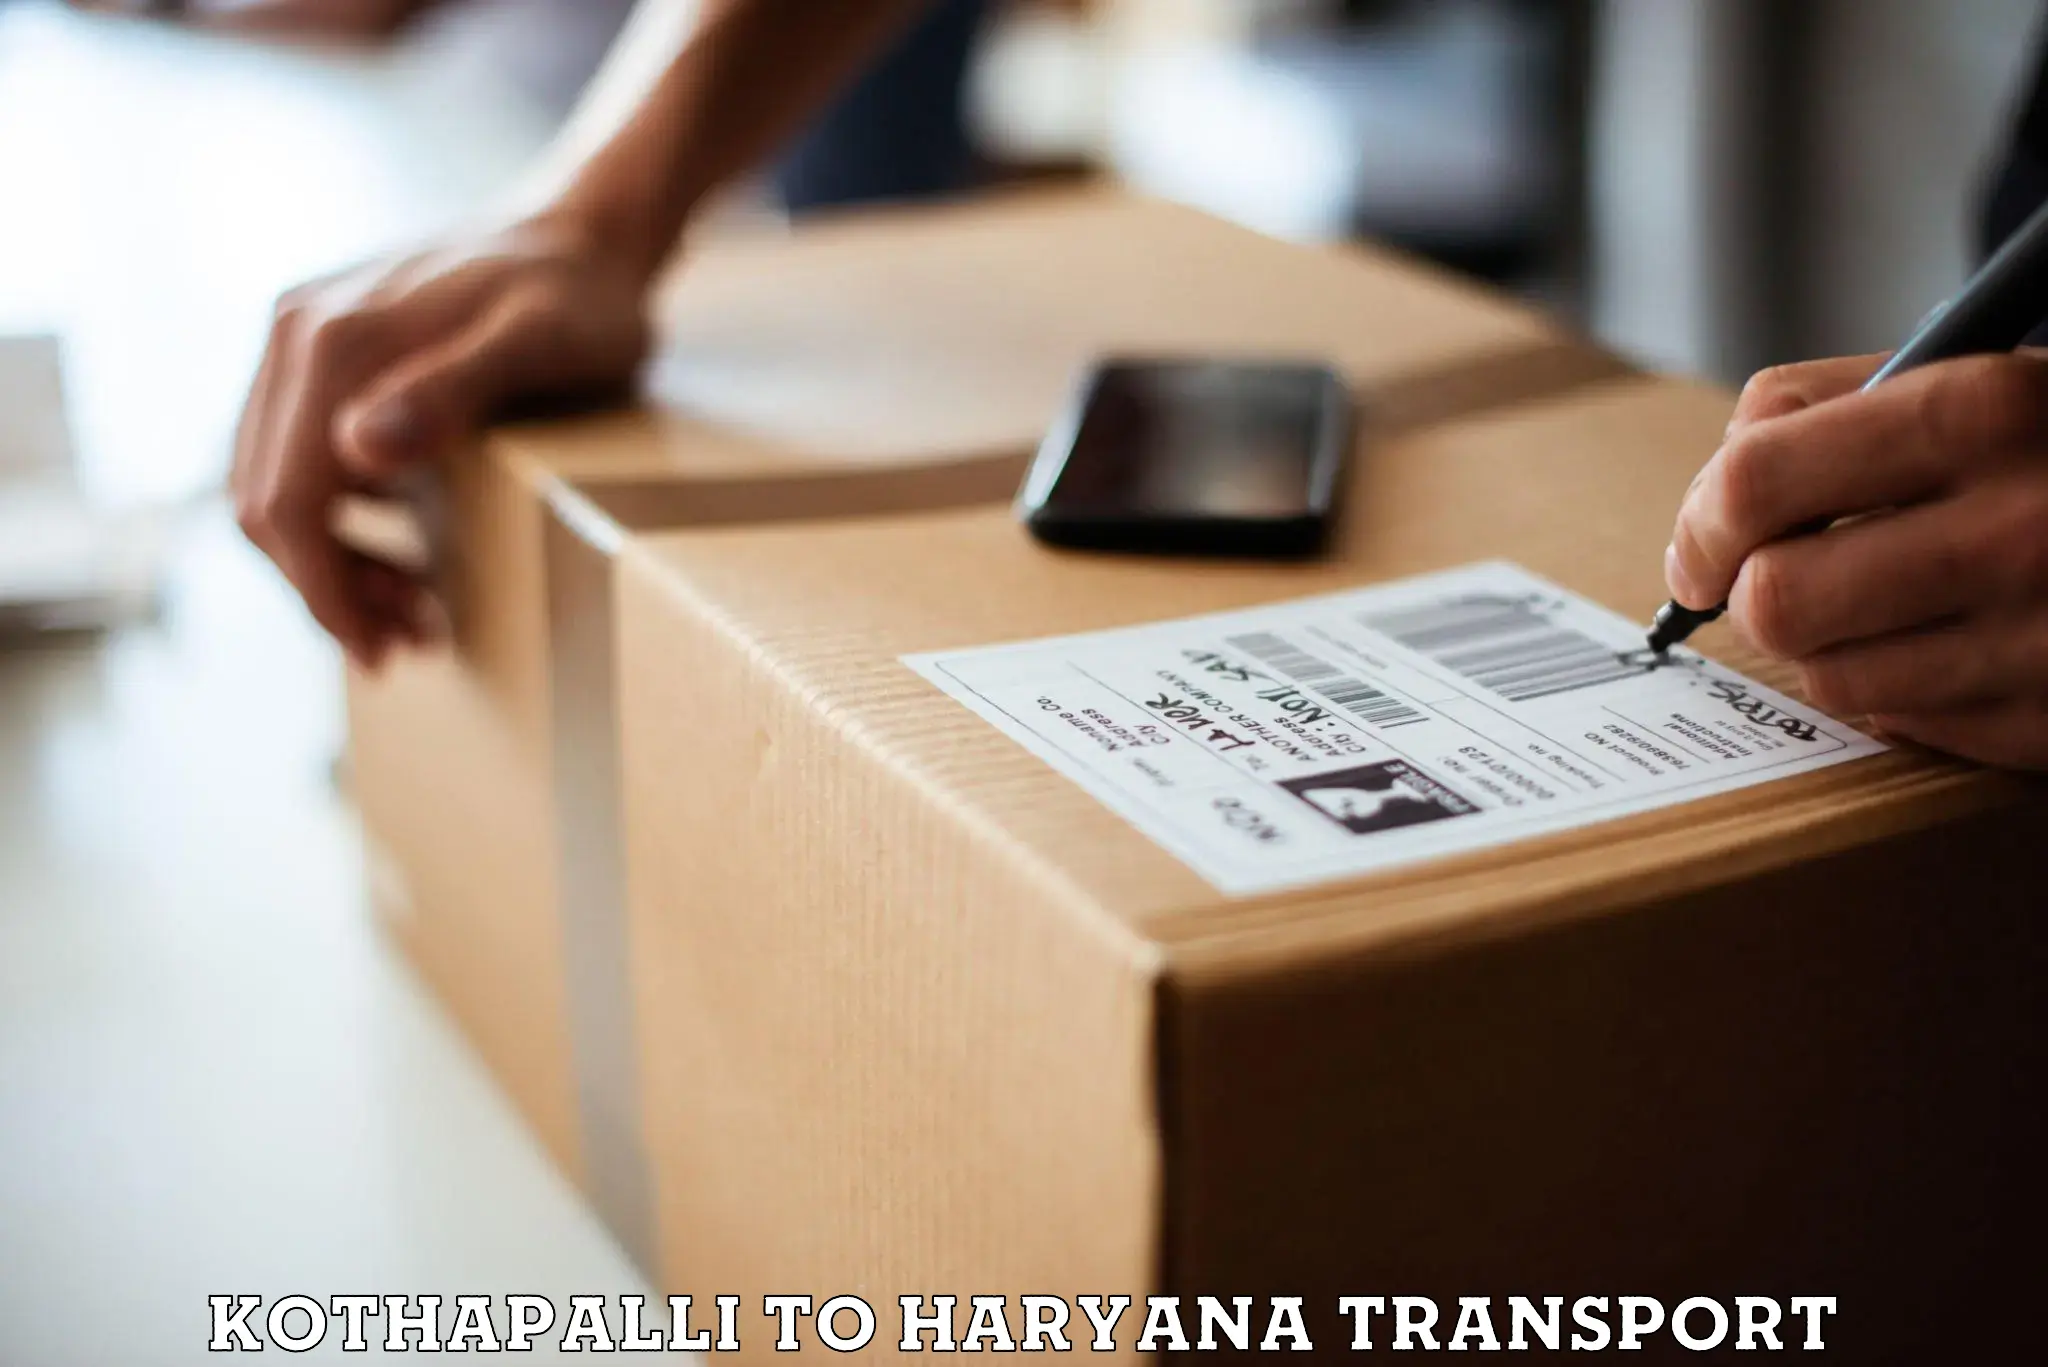 Truck transport companies in India Kothapalli to NCR Haryana